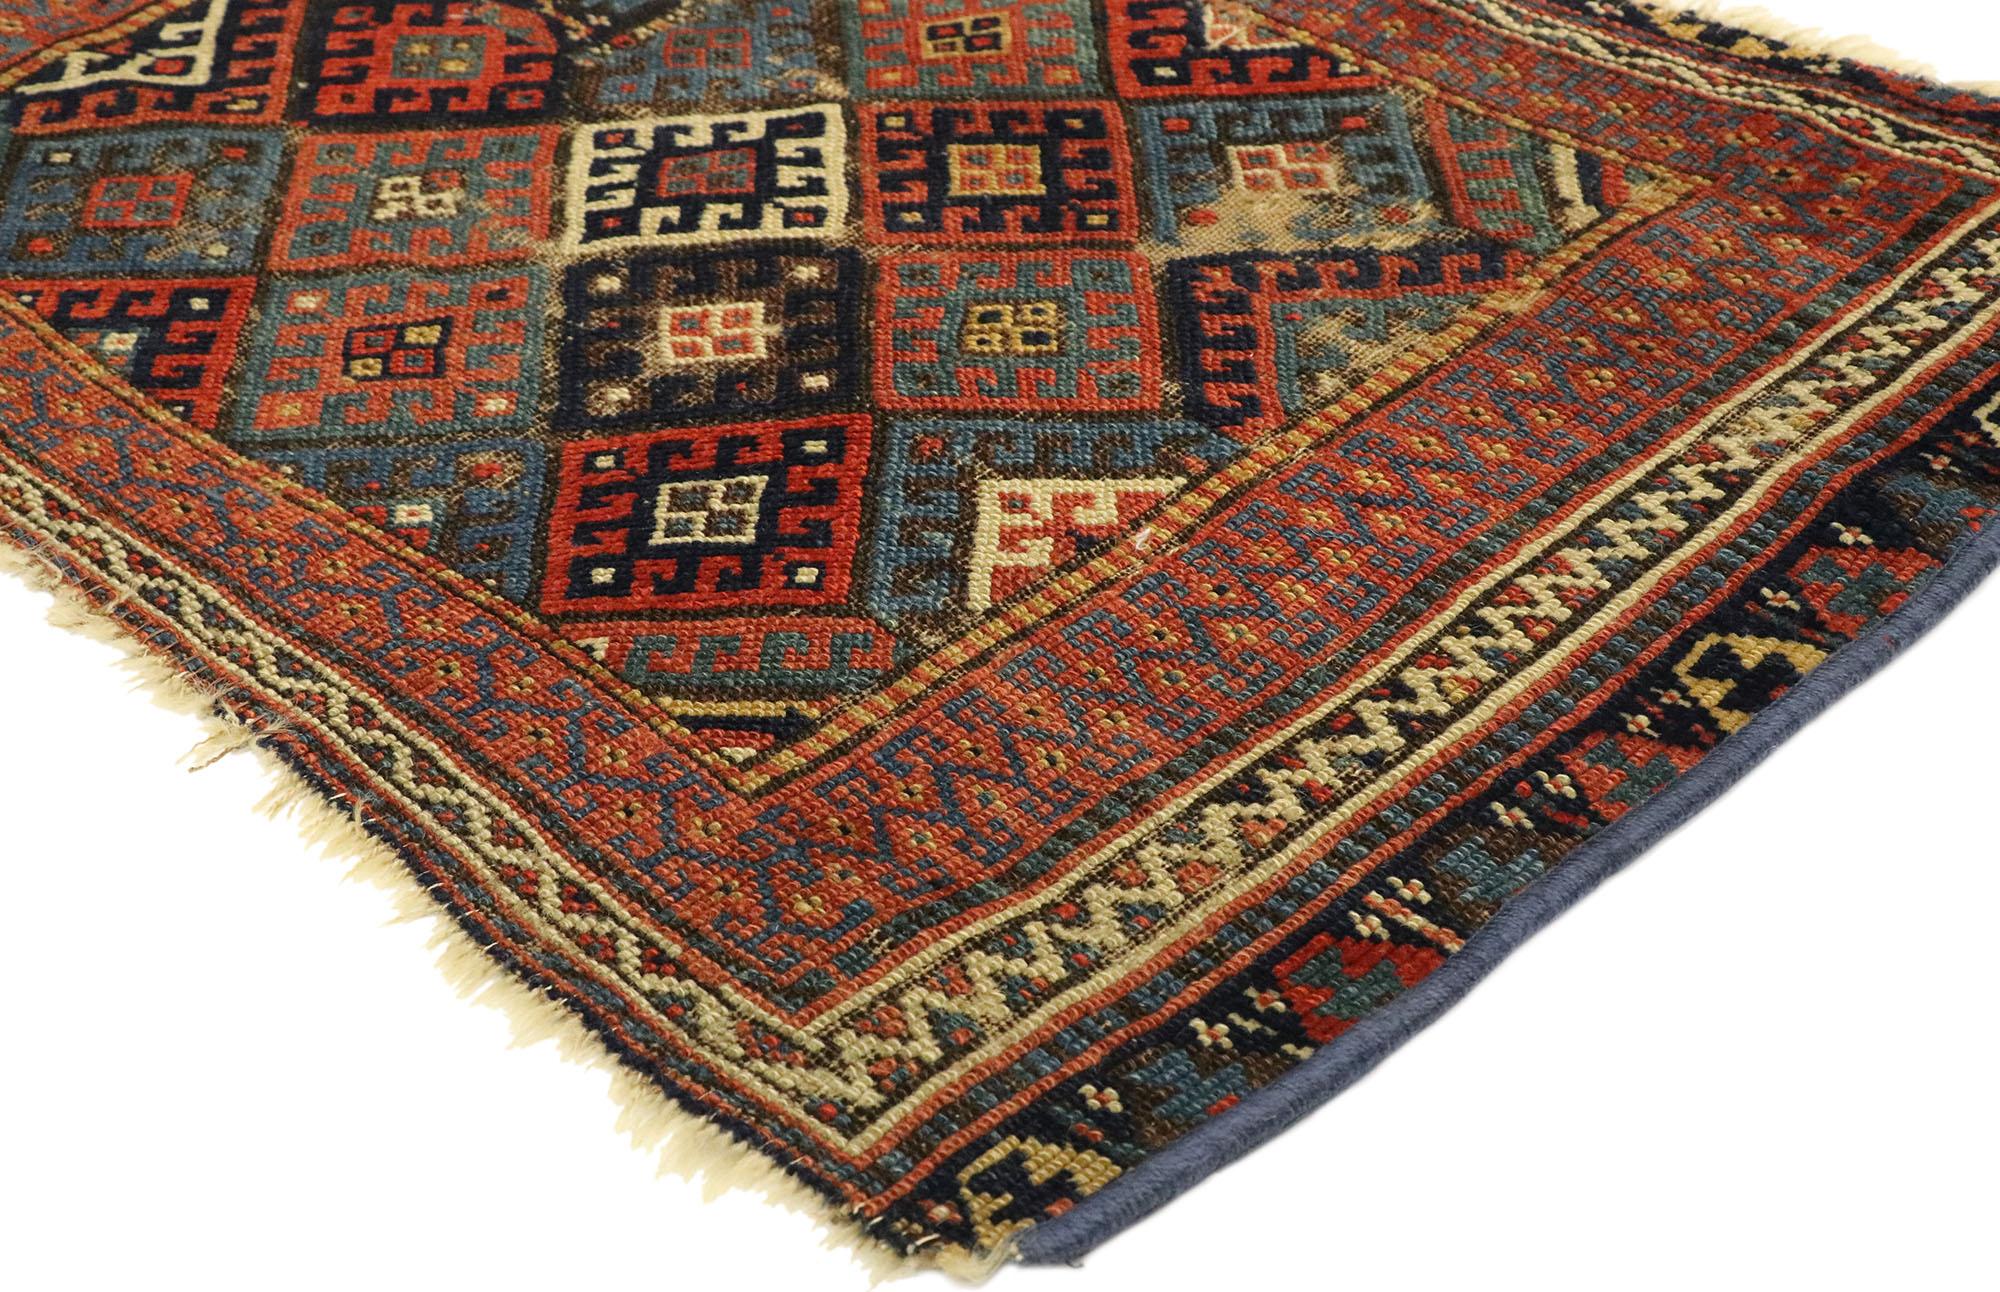 76608, worn antique Caucasian Kazak rug with tribal style, small Persian rug. With its perfectly worn-in charm, pop of color and edgy elements, this antique Caucasian accent rug will create a warm, lived-in look and take on a curated look that feels